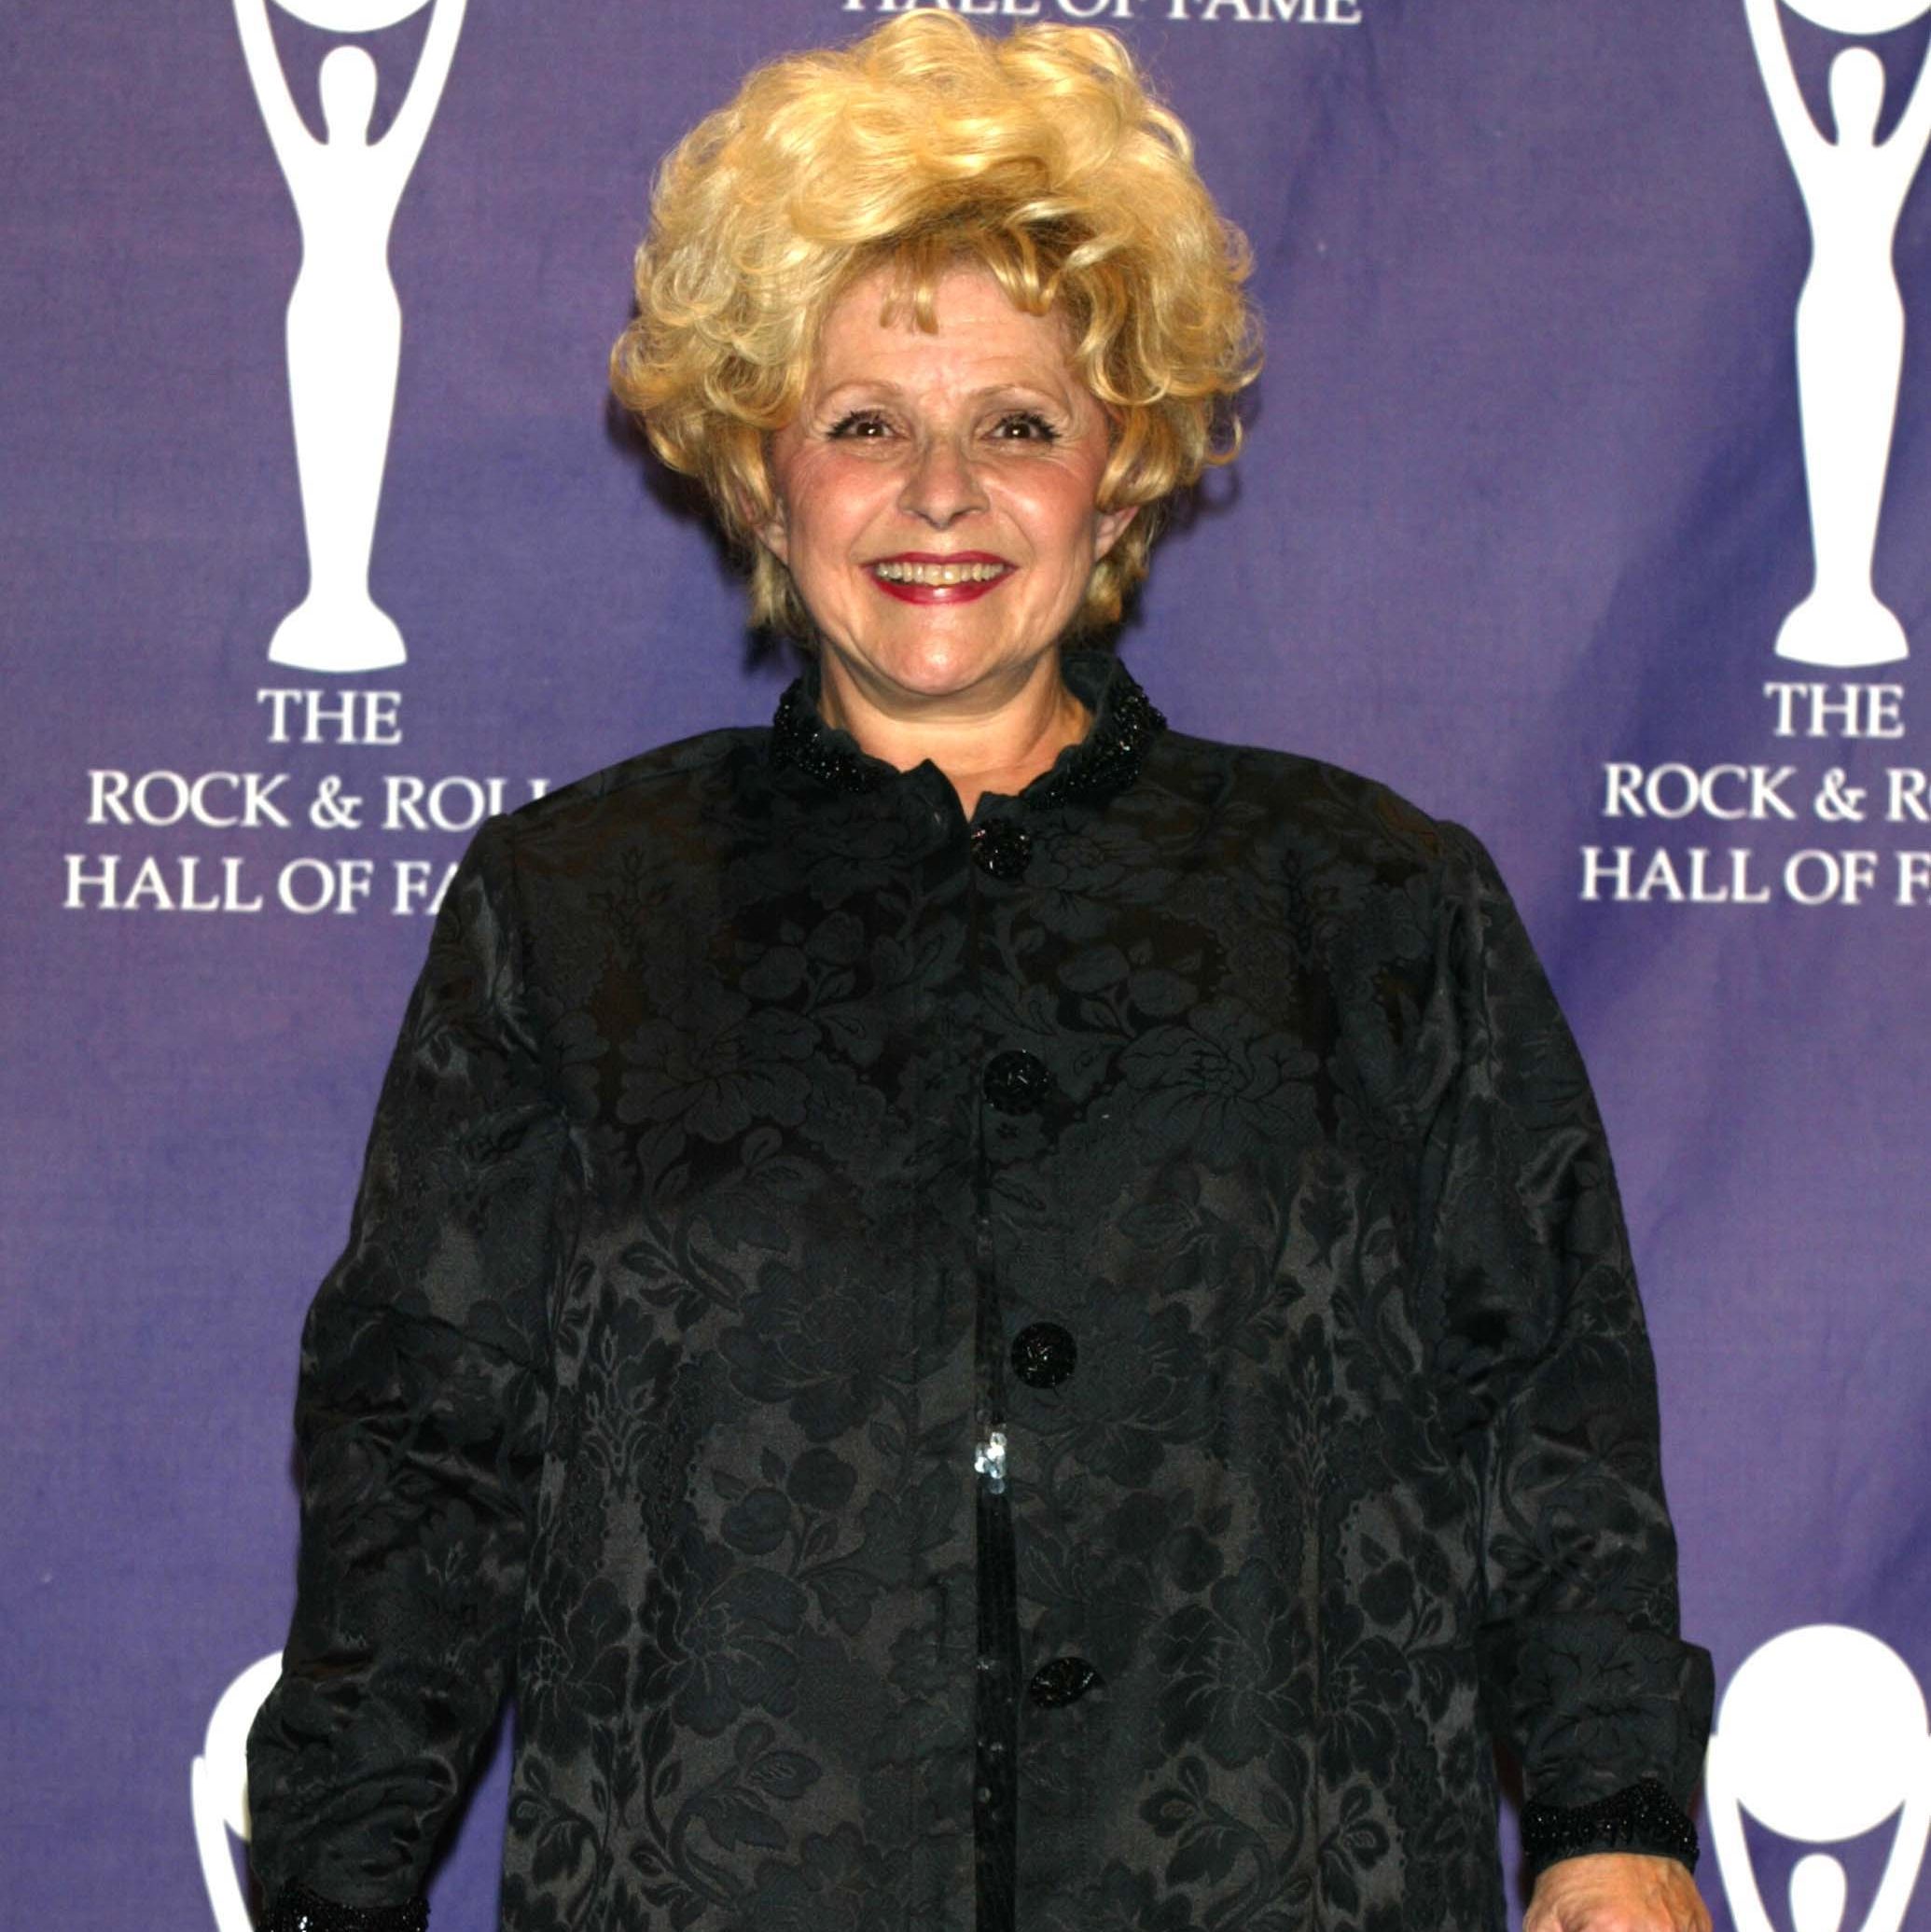 Inductee Brenda Lee at The 17th Annual Rock And Roll Hall Of Fame Induction Ceremony, 2002